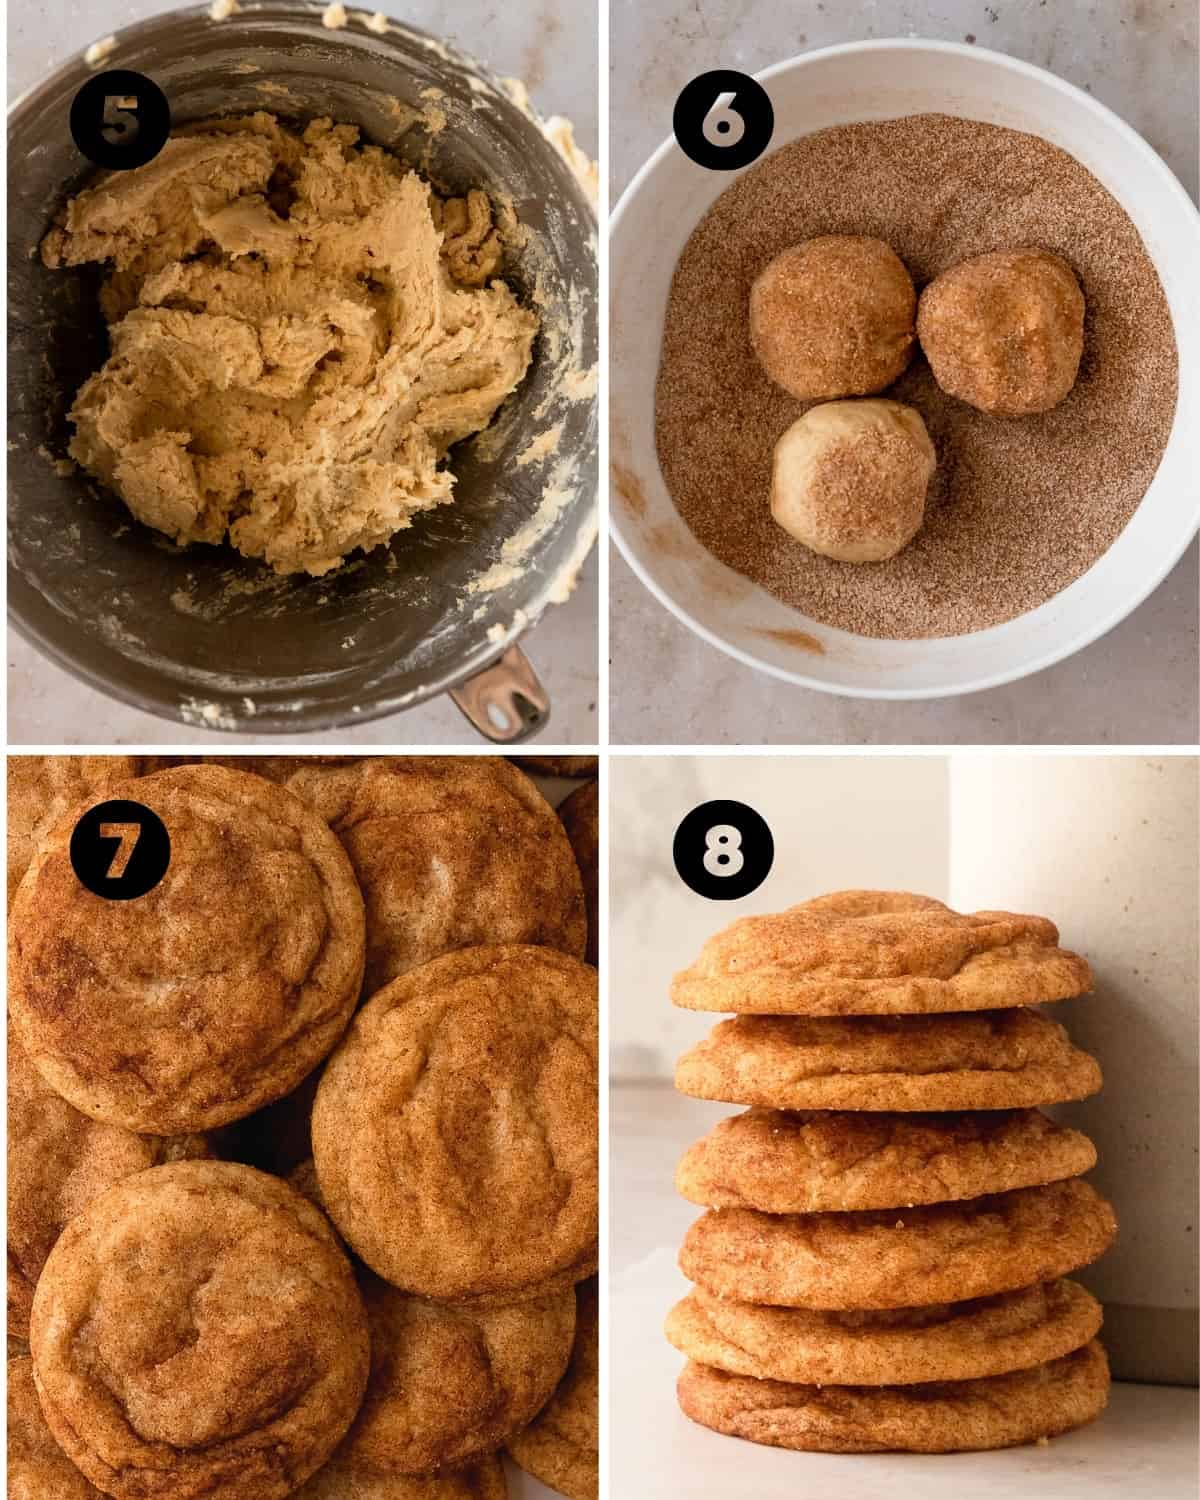 Fold the dry ingredients into the wet until just combined. Scoop the cookie dough into balls. Roll the balls into the cinnamon sugar. Bake and enjoy!